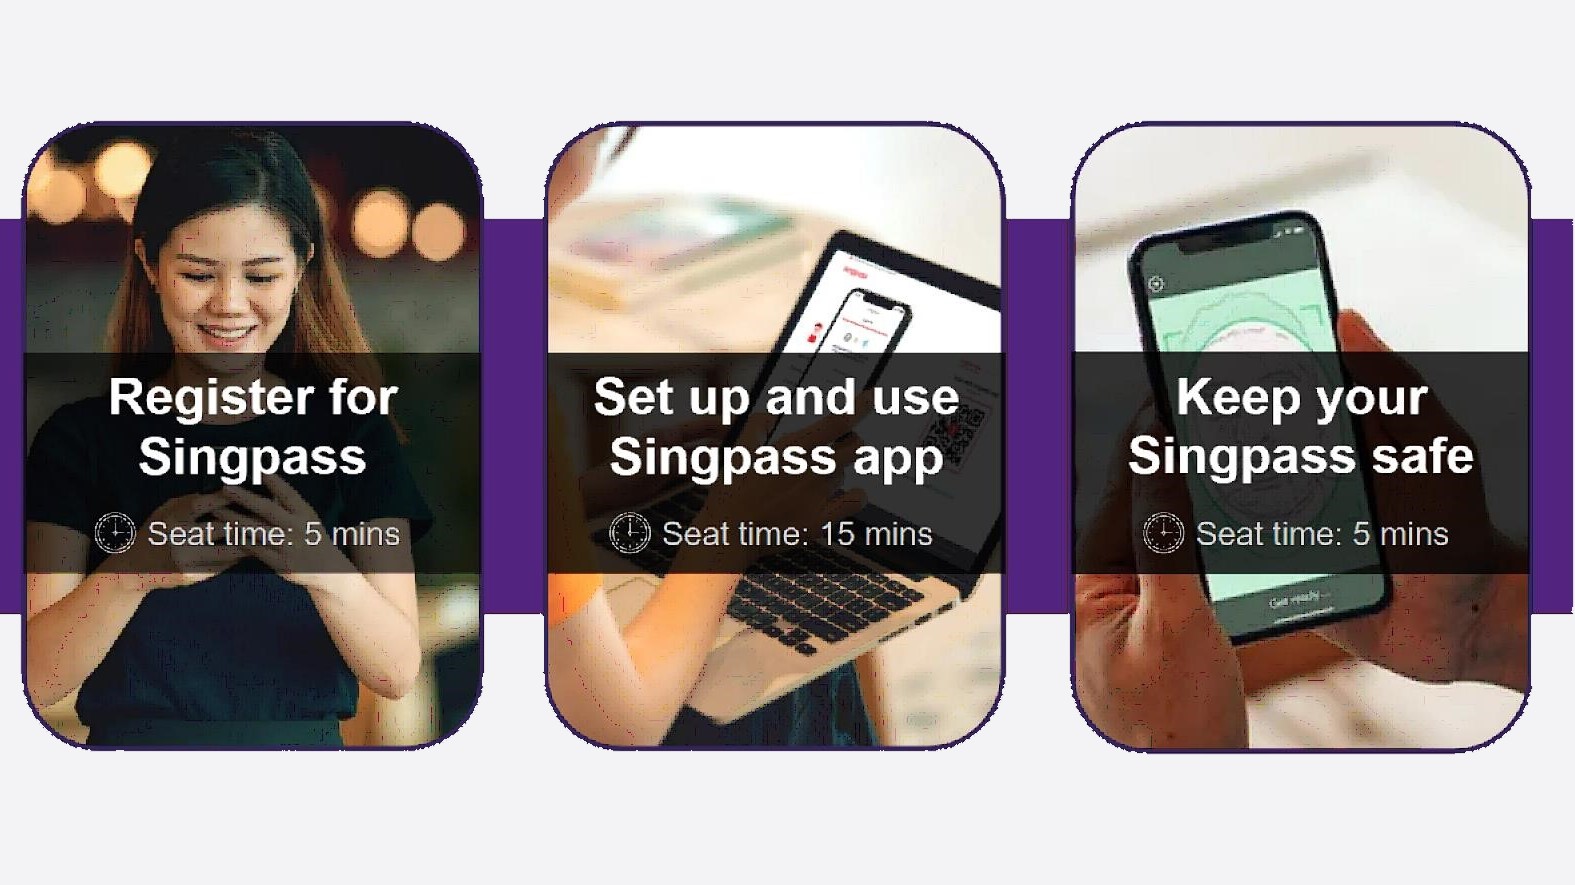 Accessing Digital Services with Singpass